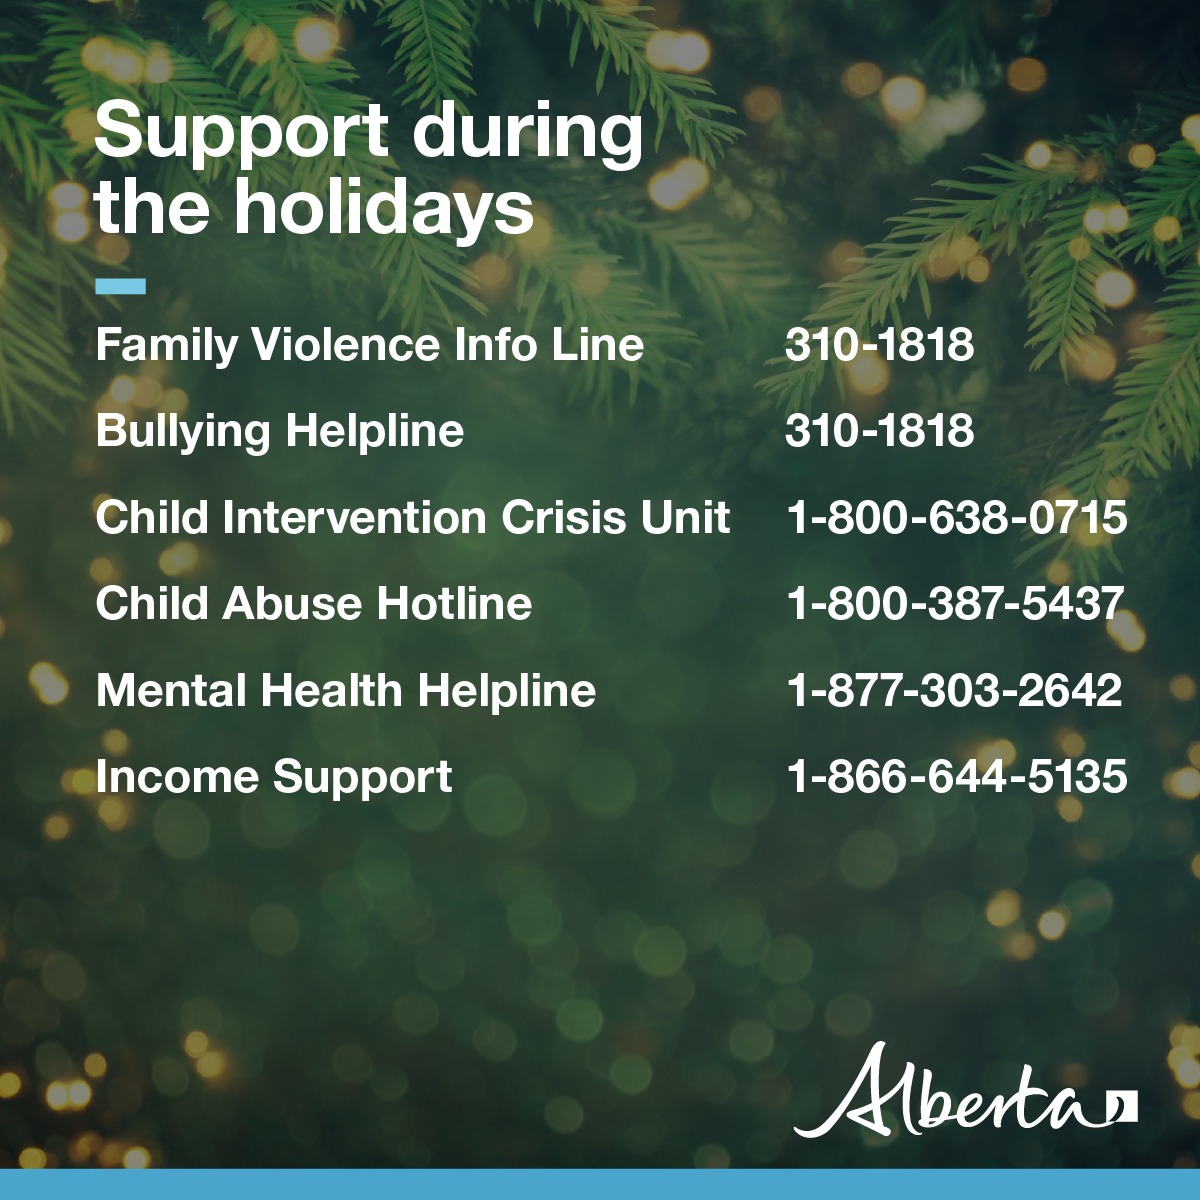 If you need support over the holidays, these helplines are open 24/7: 📞 211 Alberta 📞 Family Violence Info Line: 310-1818 📞 Mental Health Helpline: 1-877-303-2642 📞 Addiction Helpline: 1-866-332-2322 More services: alberta.ca/services-durin…